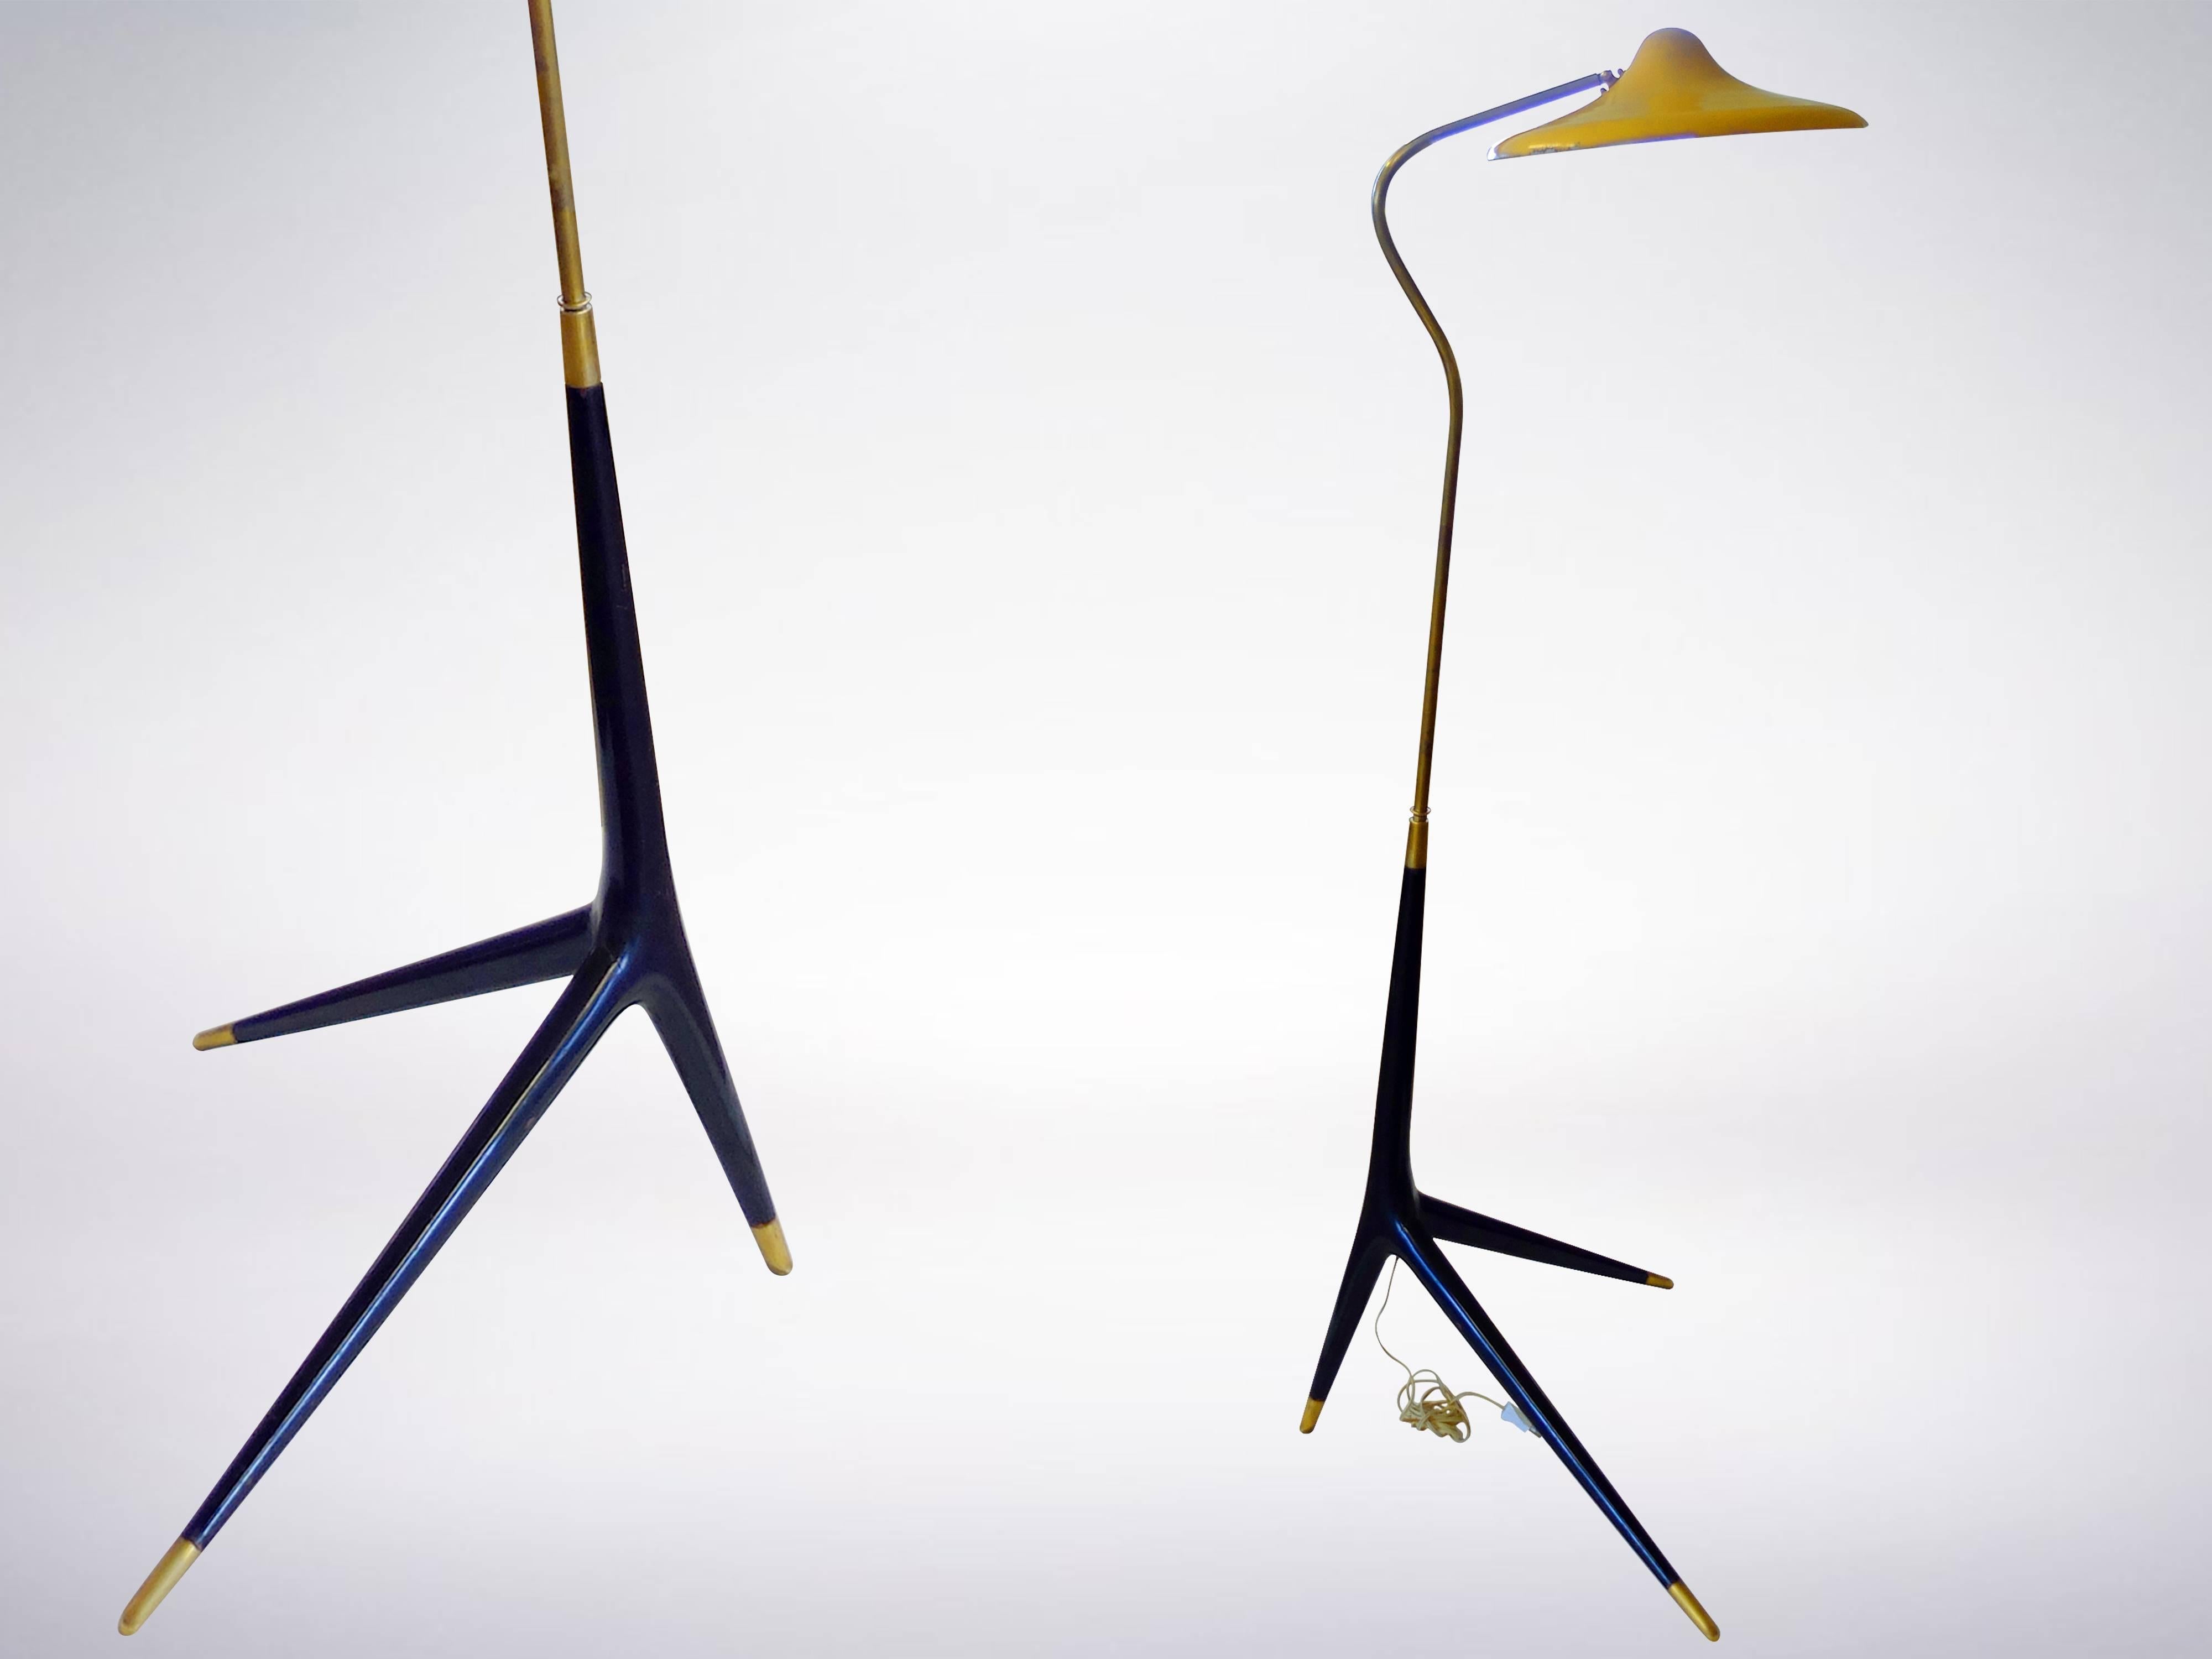 Lacquered Mid-Century Modern Floor Lamp in the Style of Franco Albini from the 1950s